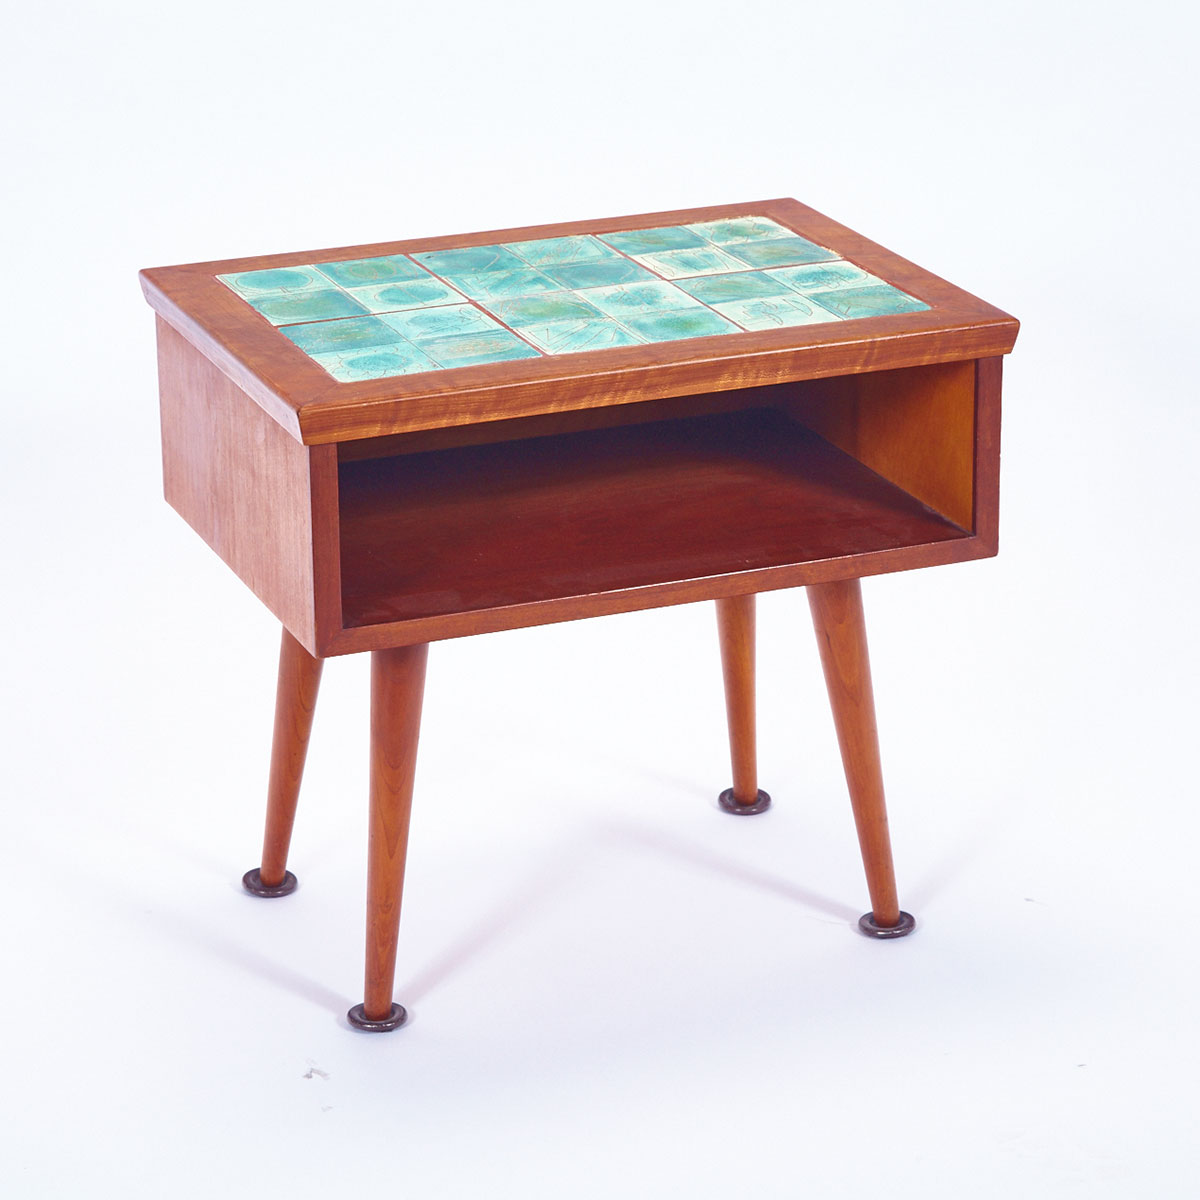 Brooklin Pottery Tile Topped Magazine Table, Theo, Susan and Ben Harlander, 1960s